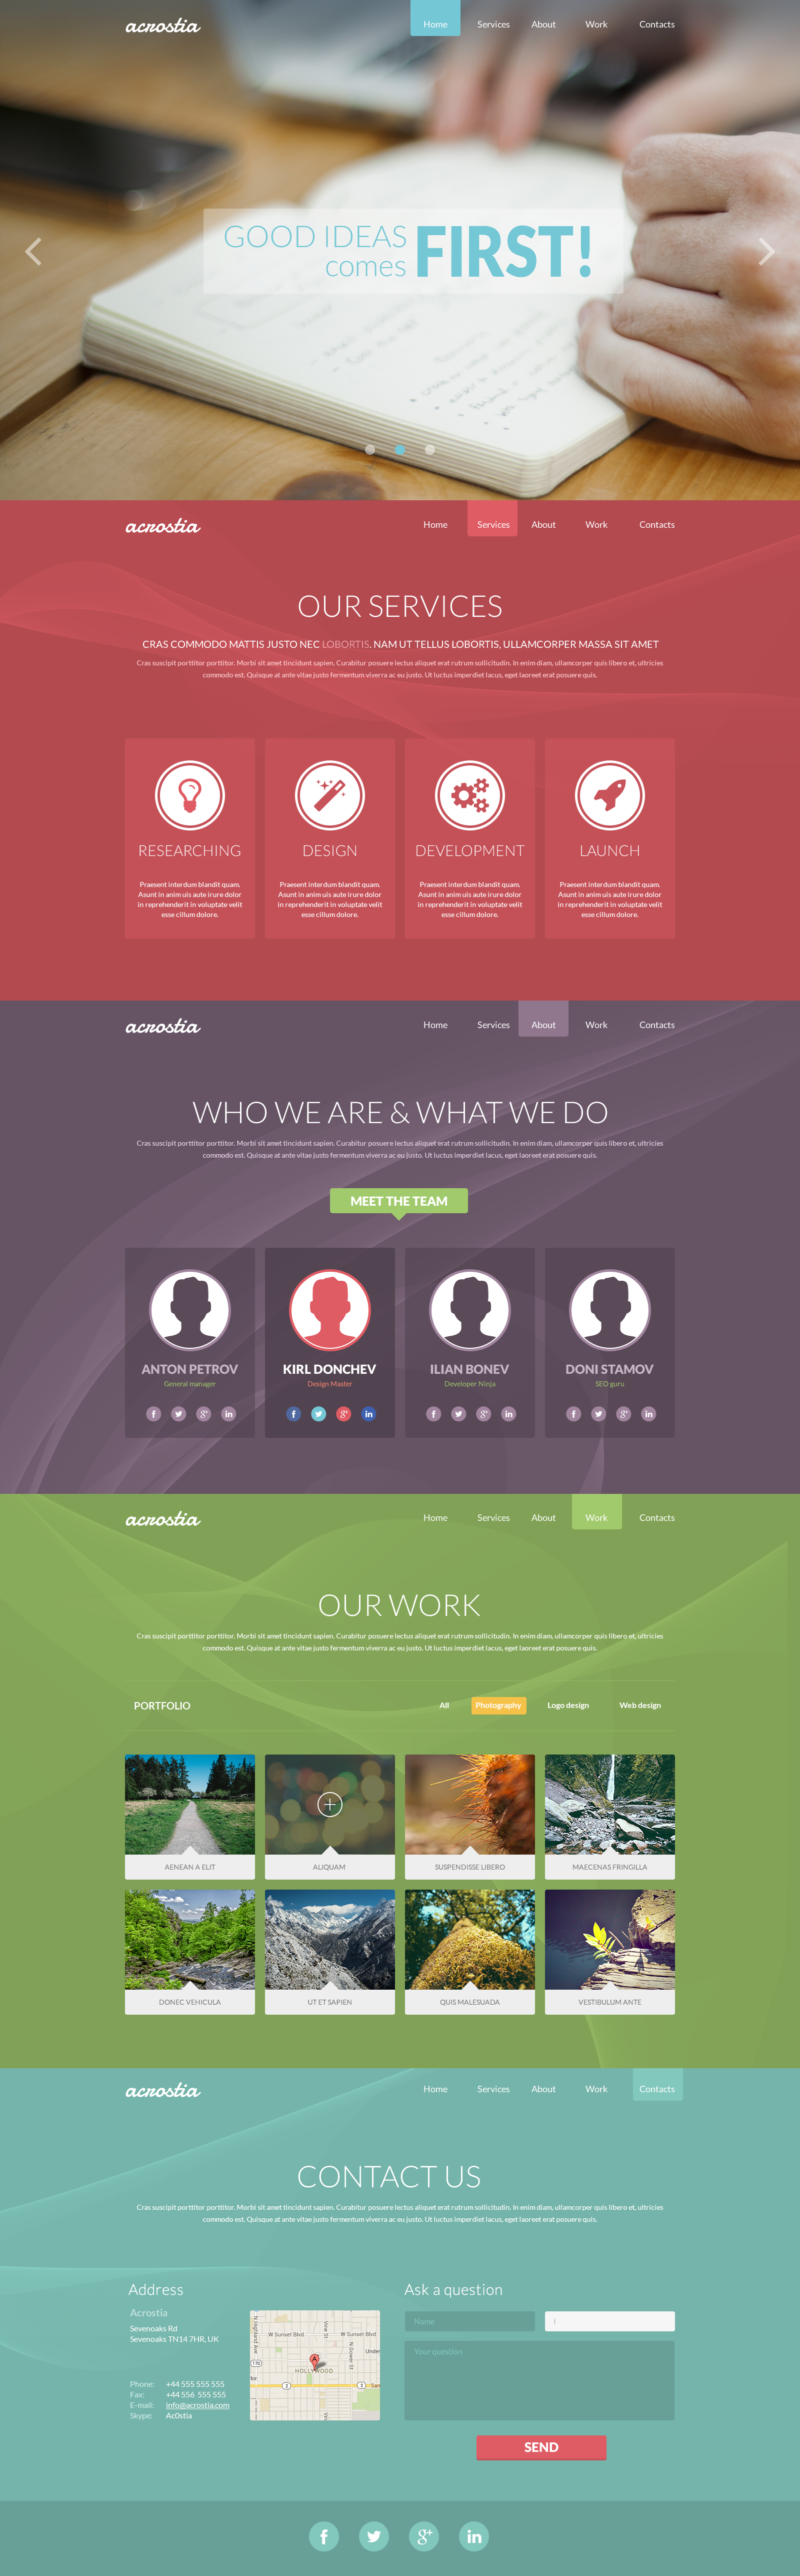 one-page-portfolio-flat-psd-template-download-download-psd